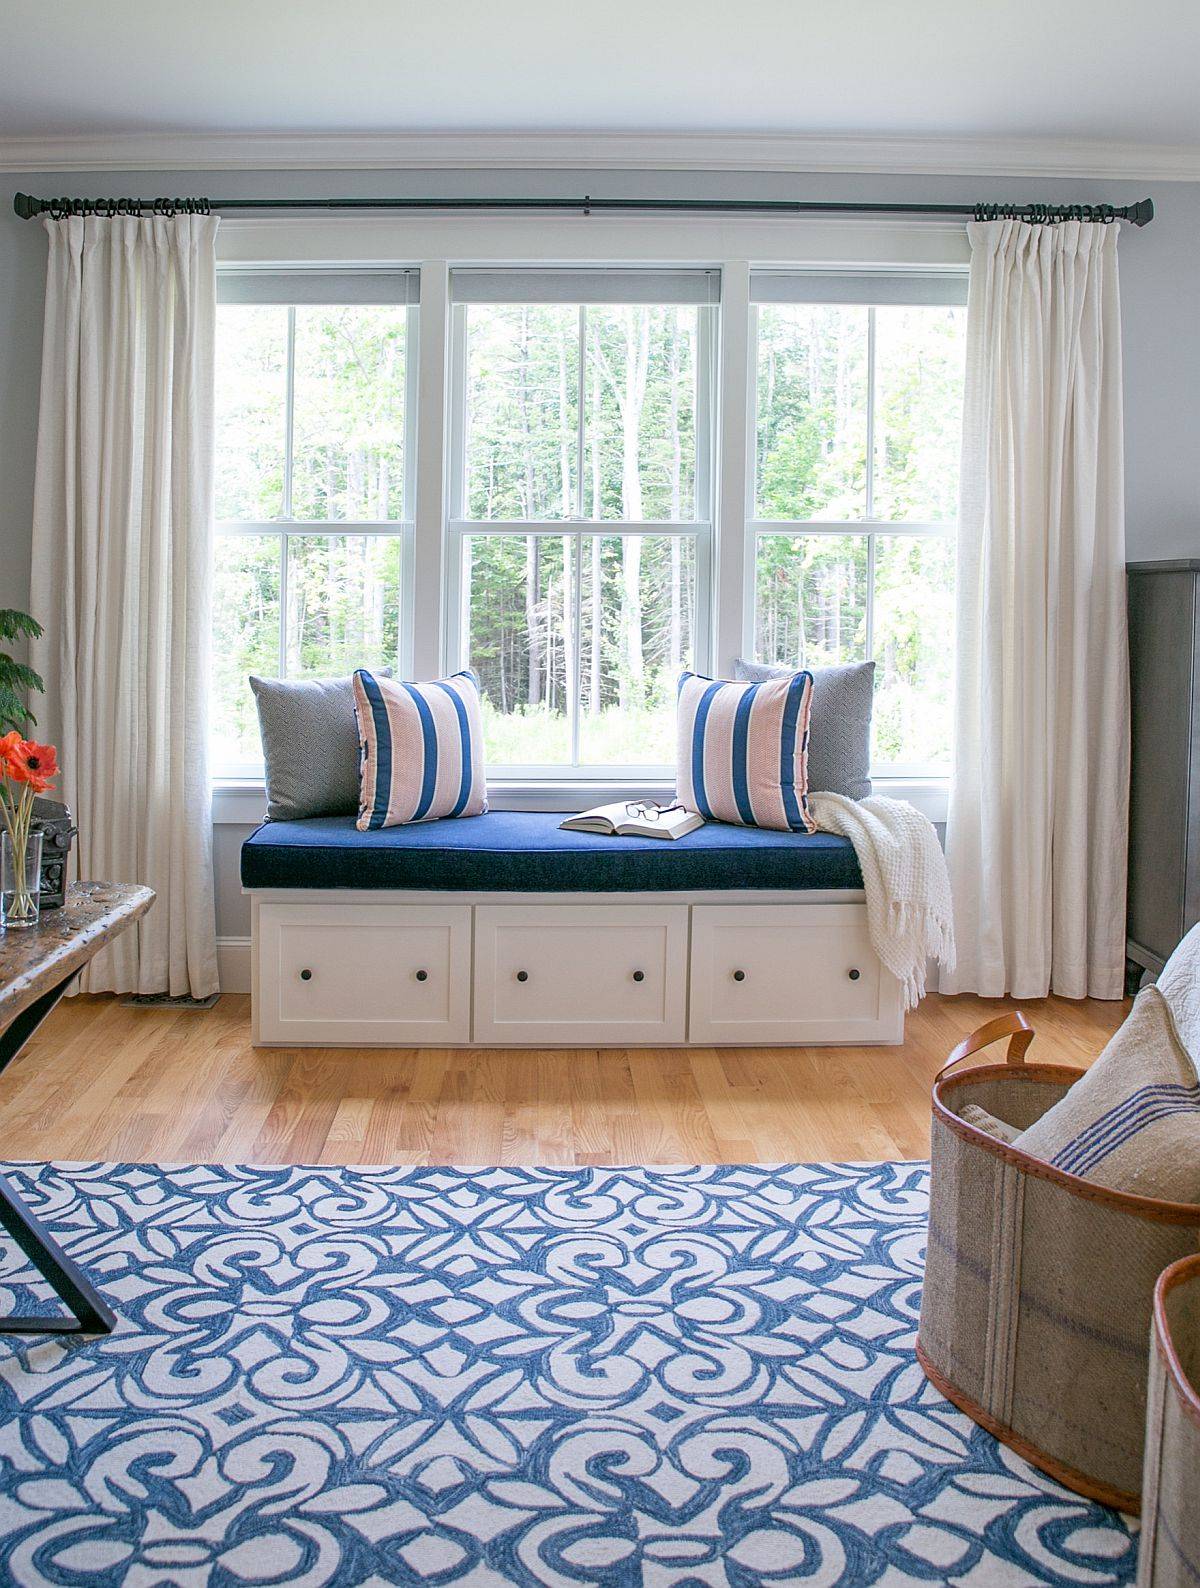 Your custom bedroom window seat need not span the entire length of the window every time!